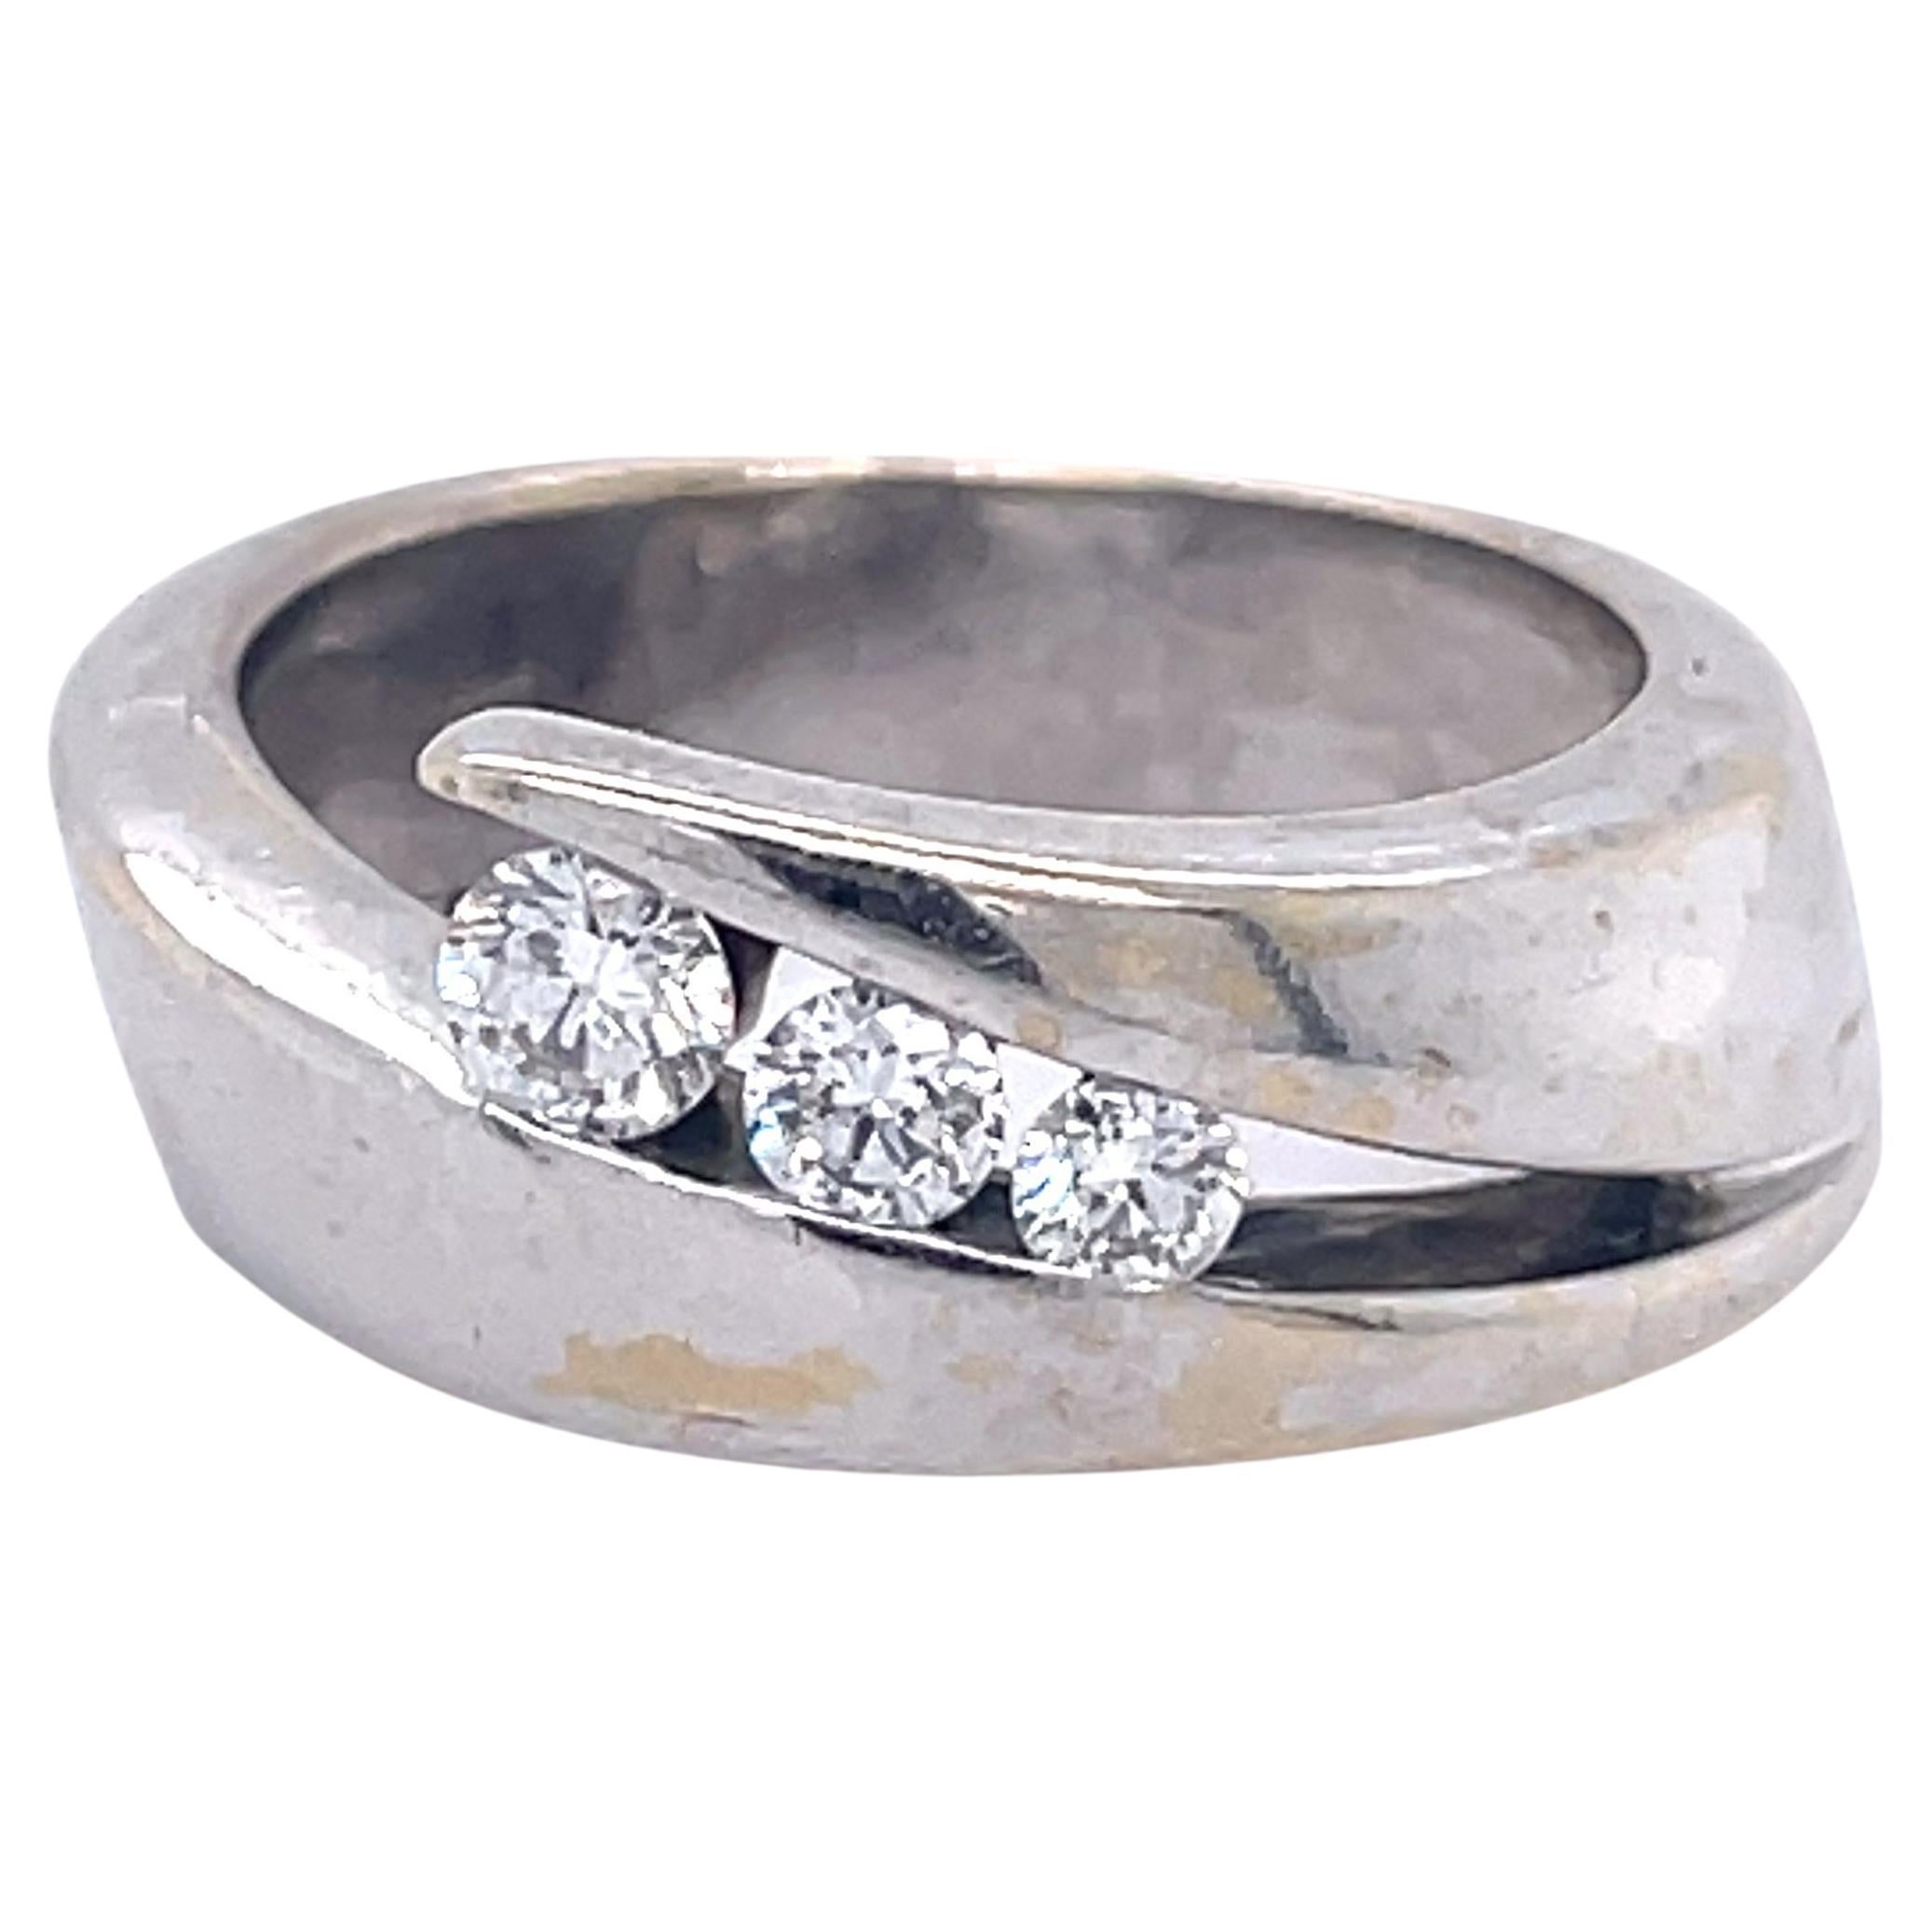 3 Diamonds Tention Ring -18K white gold, 0.3ct netural diamonds, vintage ring For Sale